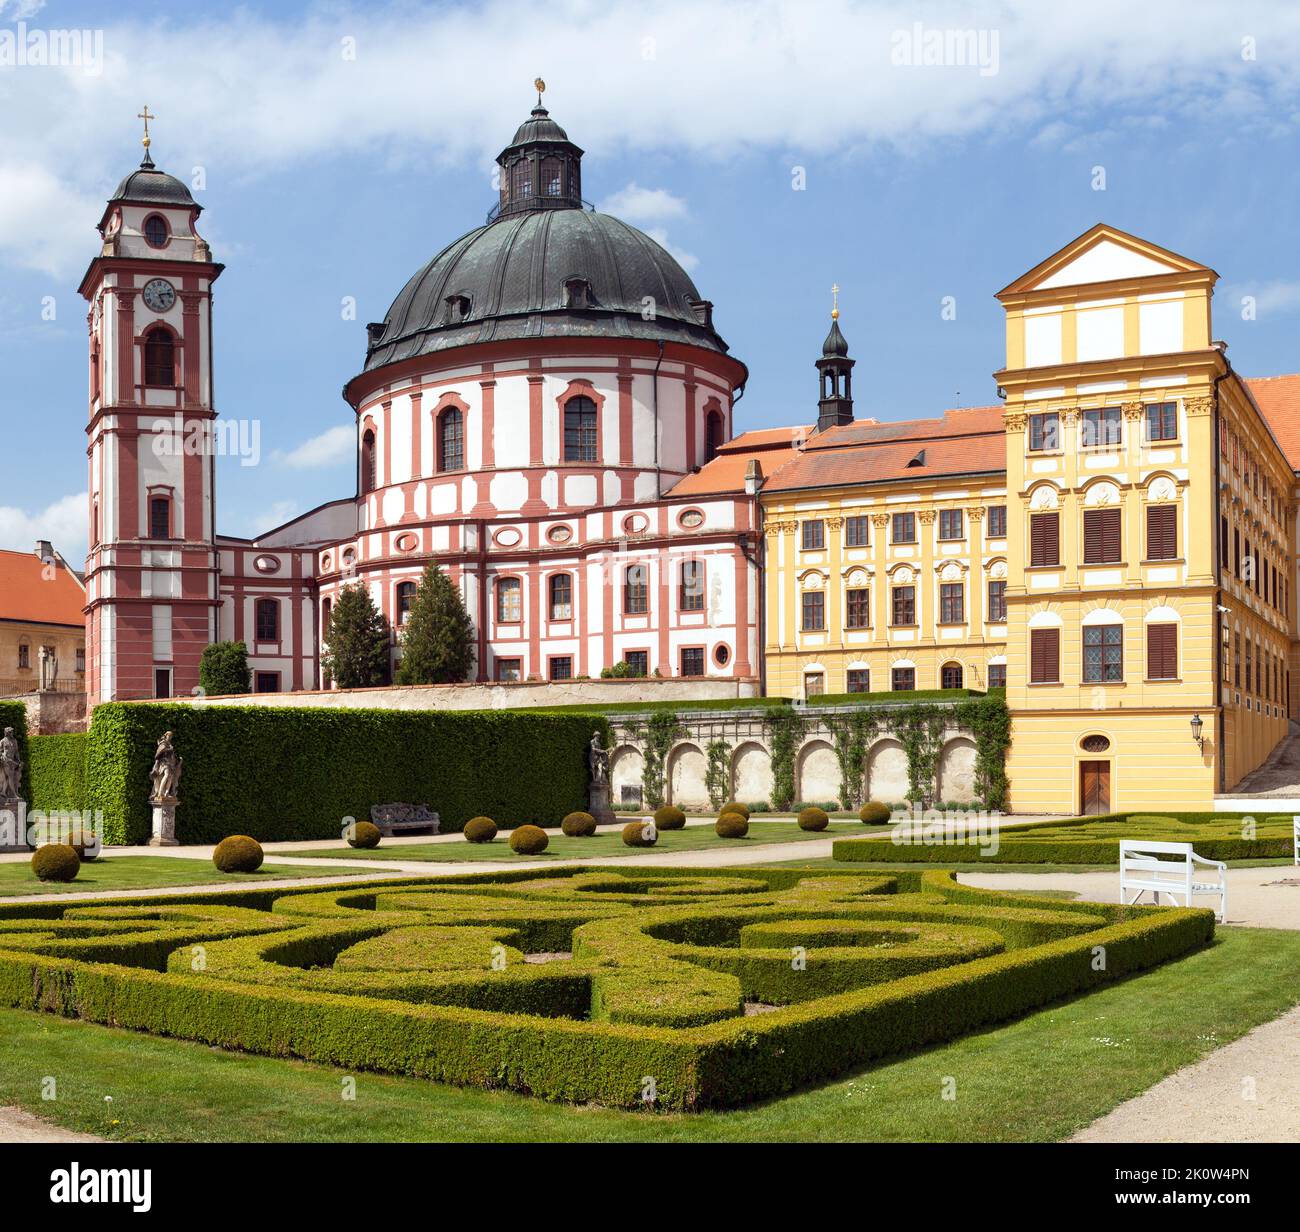 Jaromerice nad Rokytnou baroque and renaissance castle from 18th century, South Moravia,  Czech Republic, Central Europe Stock Photo